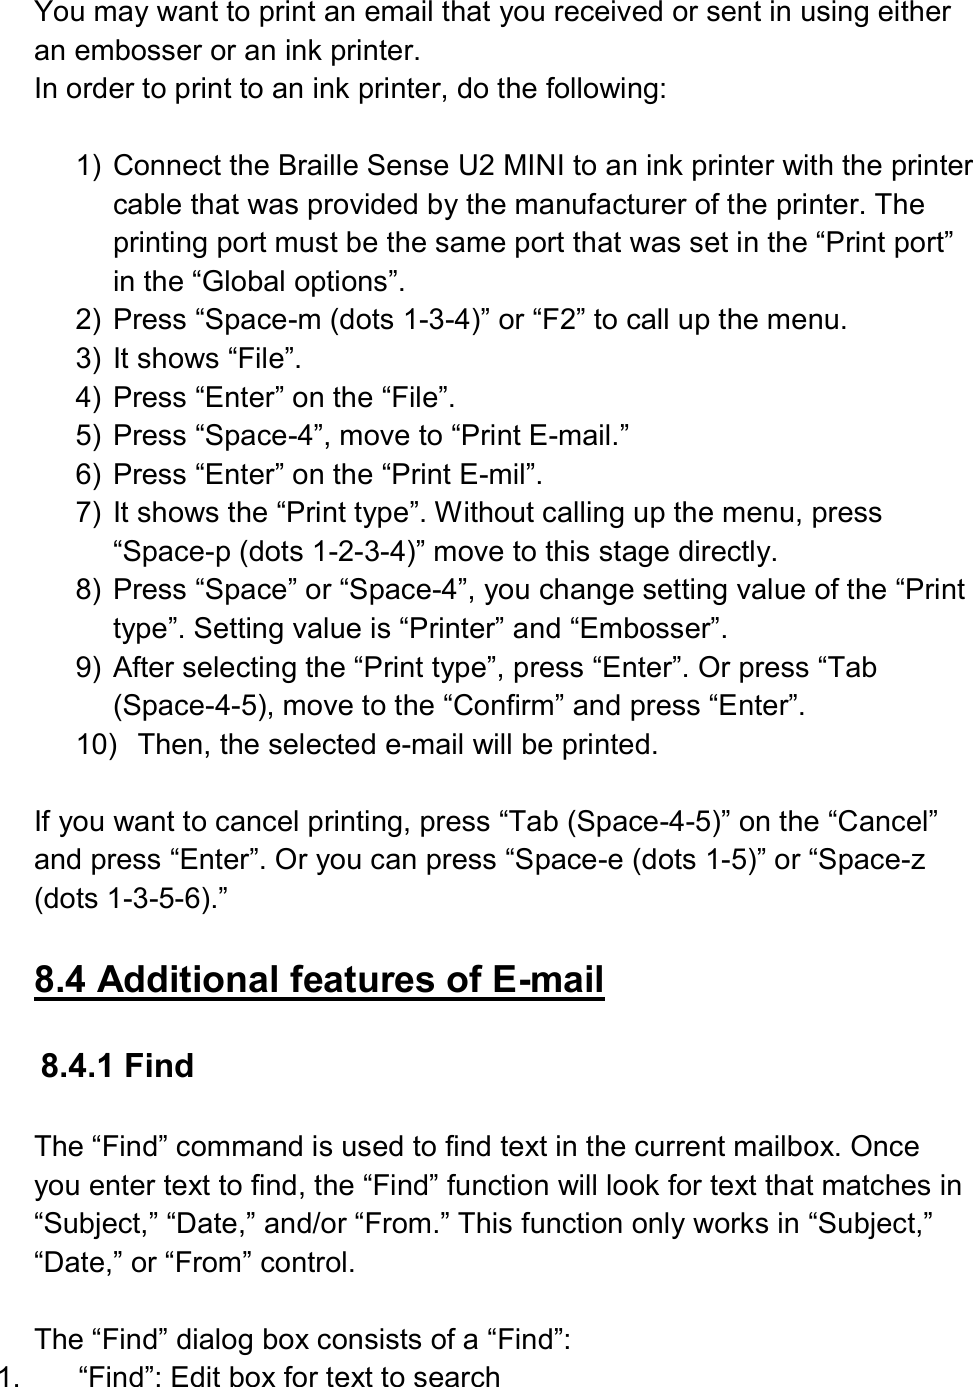  You may want to print an email that you received or sent in using either an embosser or an ink printer. In order to print to an ink printer, do the following:  1)  Connect the Braille Sense U2 MINI to an ink printer with the printer cable that was provided by the manufacturer of the printer. The printing port must be the same port that was set in the “Print port” in the “Global options”. 2)  Press “Space-m (dots 1-3-4)” or “F2” to call up the menu.   3)  It shows “File”. 4)  Press “Enter” on the “File”. 5)  Press “Space-4”, move to “Print E-mail.” 6)  Press “Enter” on the “Print E-mil”.   7)  It shows the “Print type”. Without calling up the menu, press “Space-p (dots 1-2-3-4)” move to this stage directly. 8)  Press “Space” or “Space-4”, you change setting value of the “Print type”. Setting value is “Printer” and “Embosser”. 9)  After selecting the “Print type”, press “Enter”. Or press “Tab (Space-4-5), move to the “Confirm” and press “Enter”. 10)  Then, the selected e-mail will be printed.  If you want to cancel printing, press “Tab (Space-4-5)” on the “Cancel” and press “Enter”. Or you can press “Space-e (dots 1-5)” or “Space-z (dots 1-3-5-6).”  8.4 Additional features of E-mail  8.4.1 Find  The “Find” command is used to find text in the current mailbox. Once you enter text to find, the “Find” function will look for text that matches in “Subject,” “Date,” and/or “From.” This function only works in “Subject,” “Date,” or “From” control.  The “Find” dialog box consists of a “Find”:   1.  “Find”: Edit box for text to search 